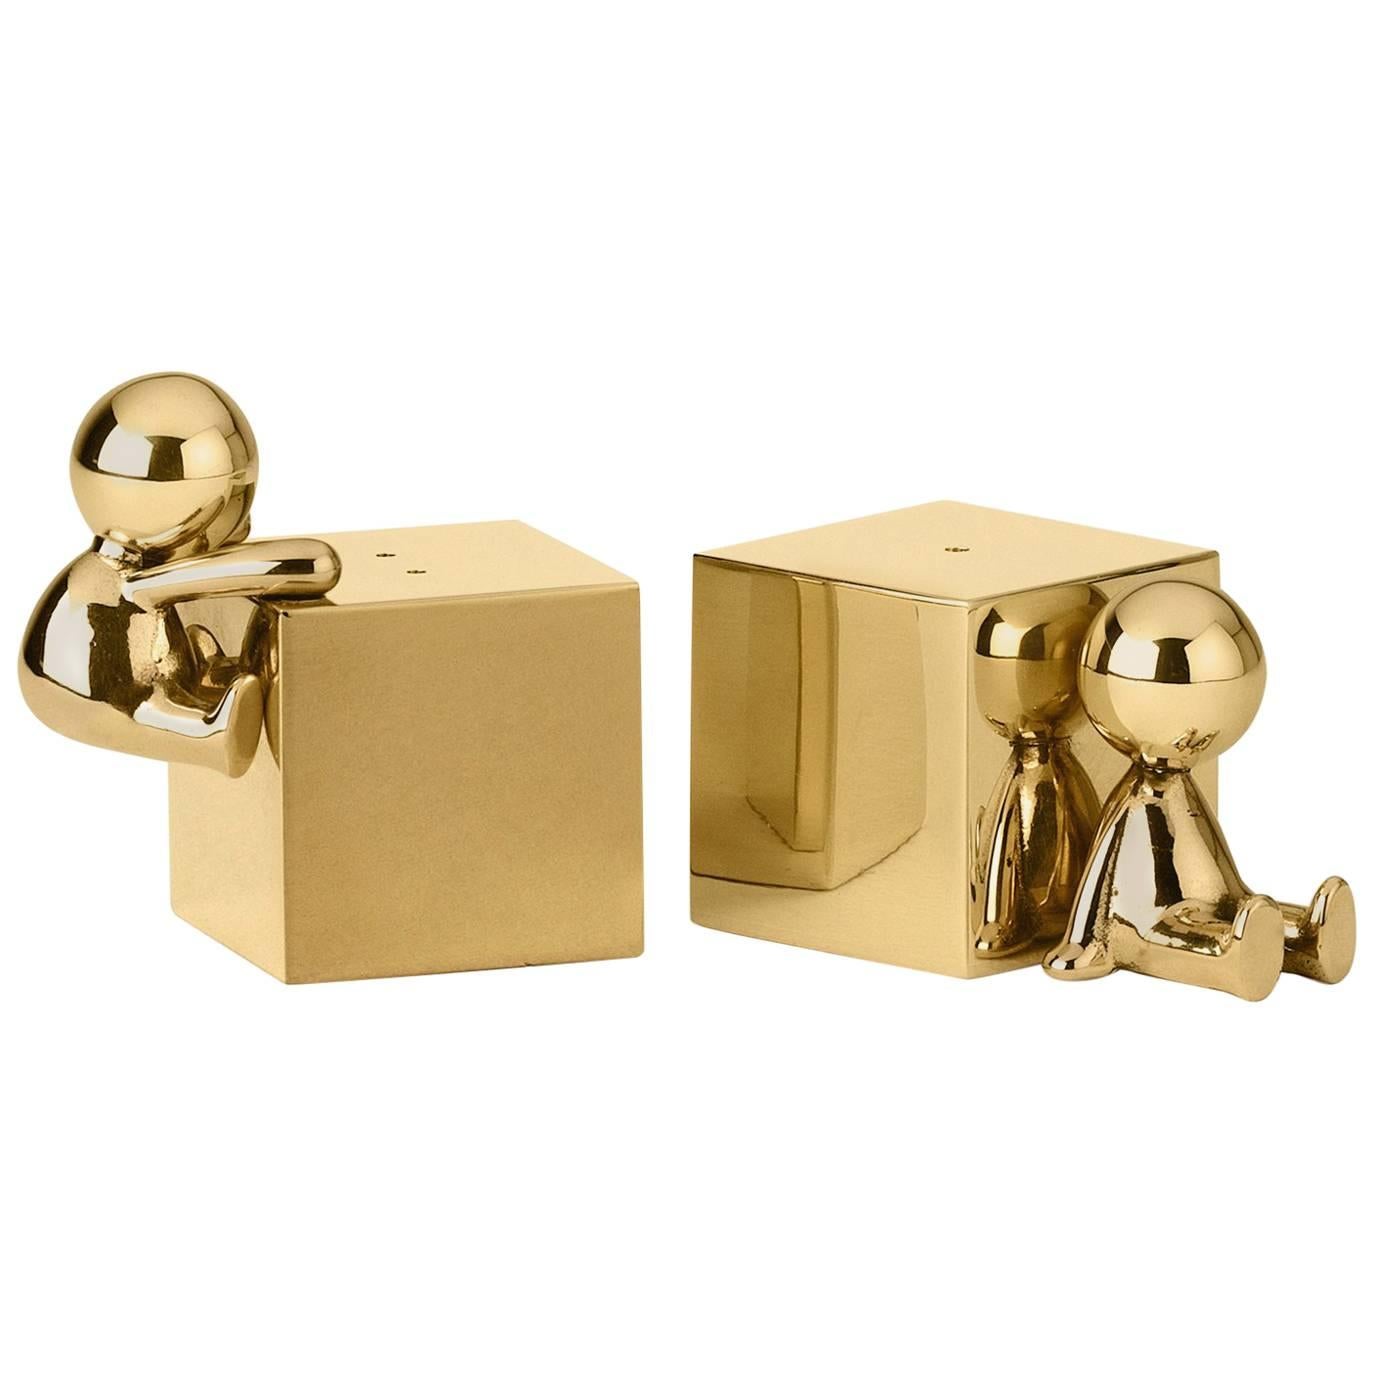 Ghidini 1961 Omini Salt and Pepper Shakers in Polished Brass